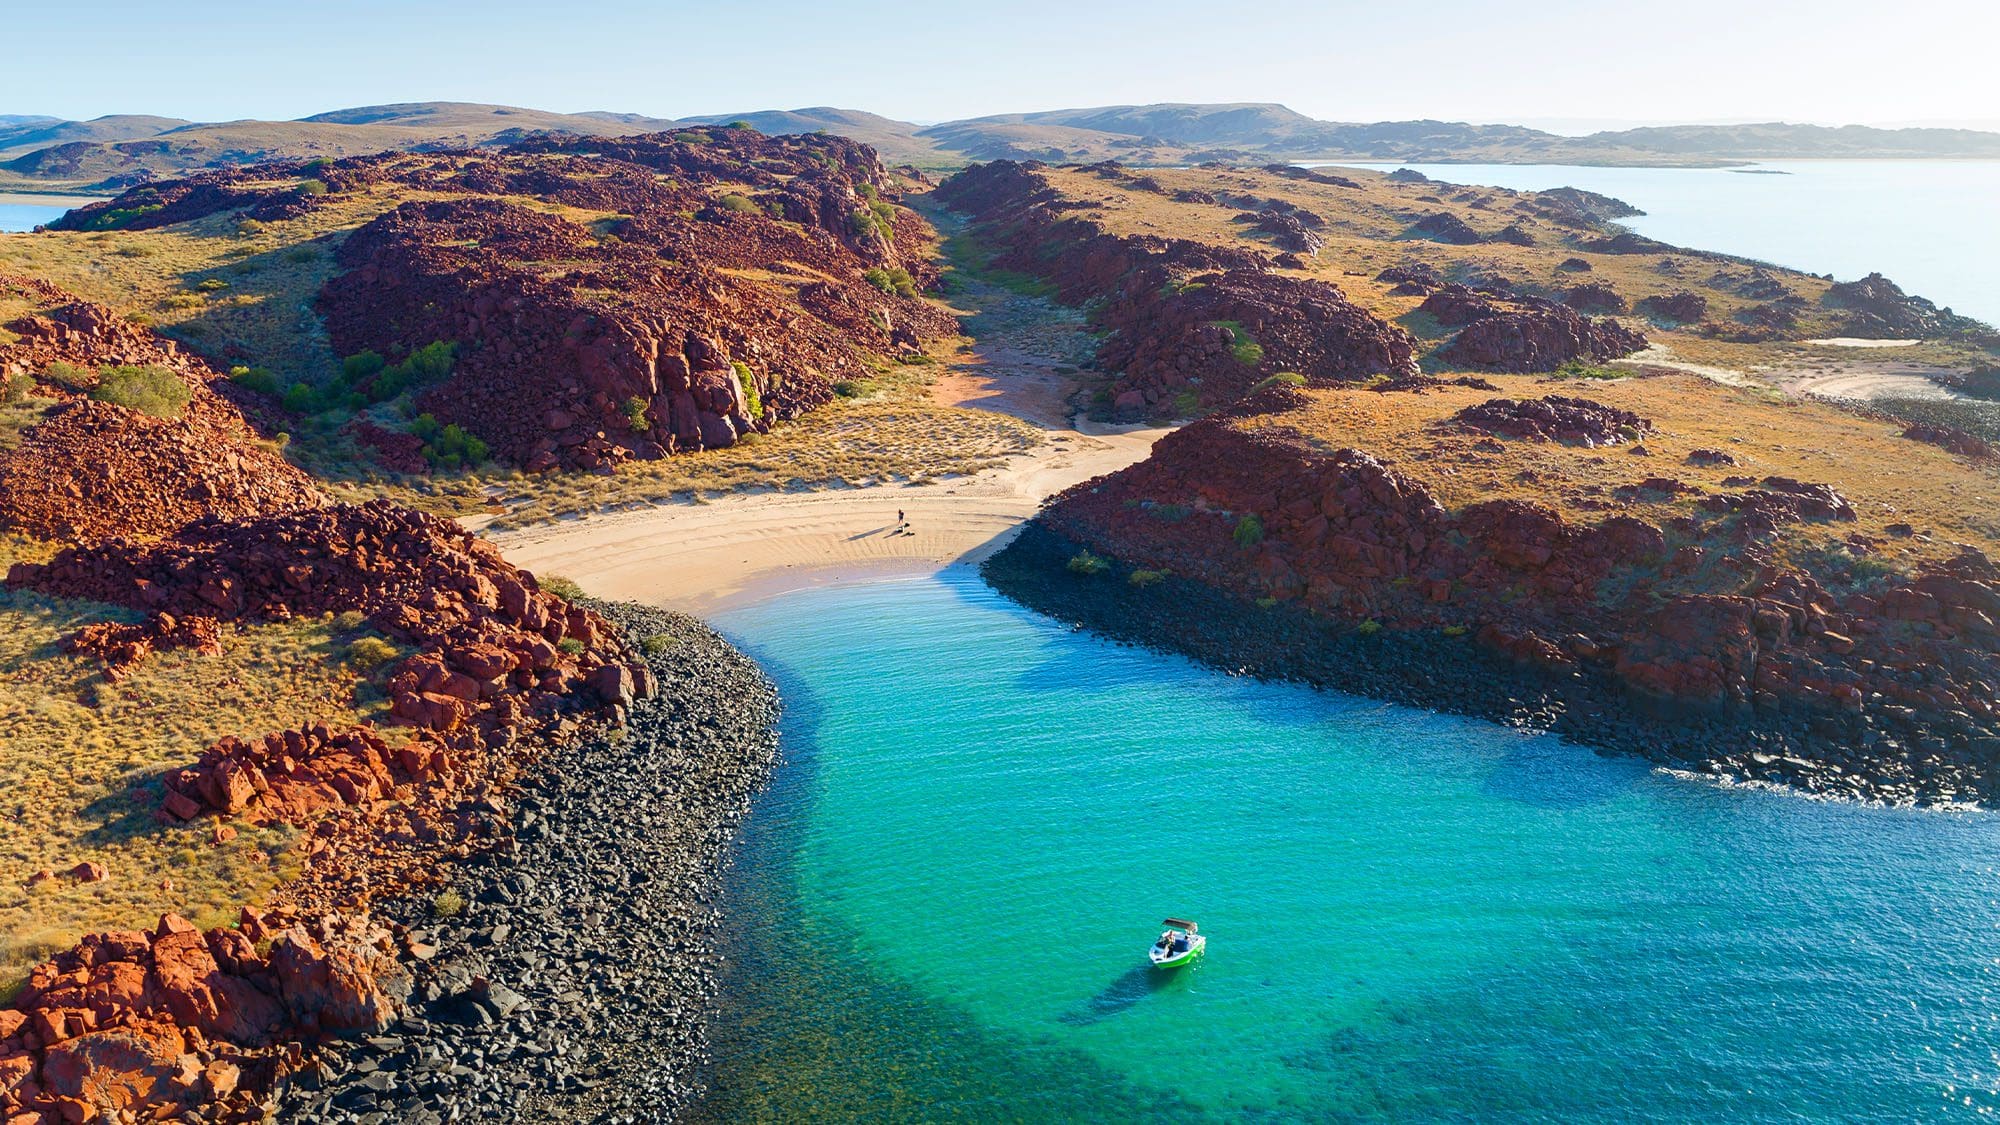 Boat in a turquoise bay in remote North-West Australia